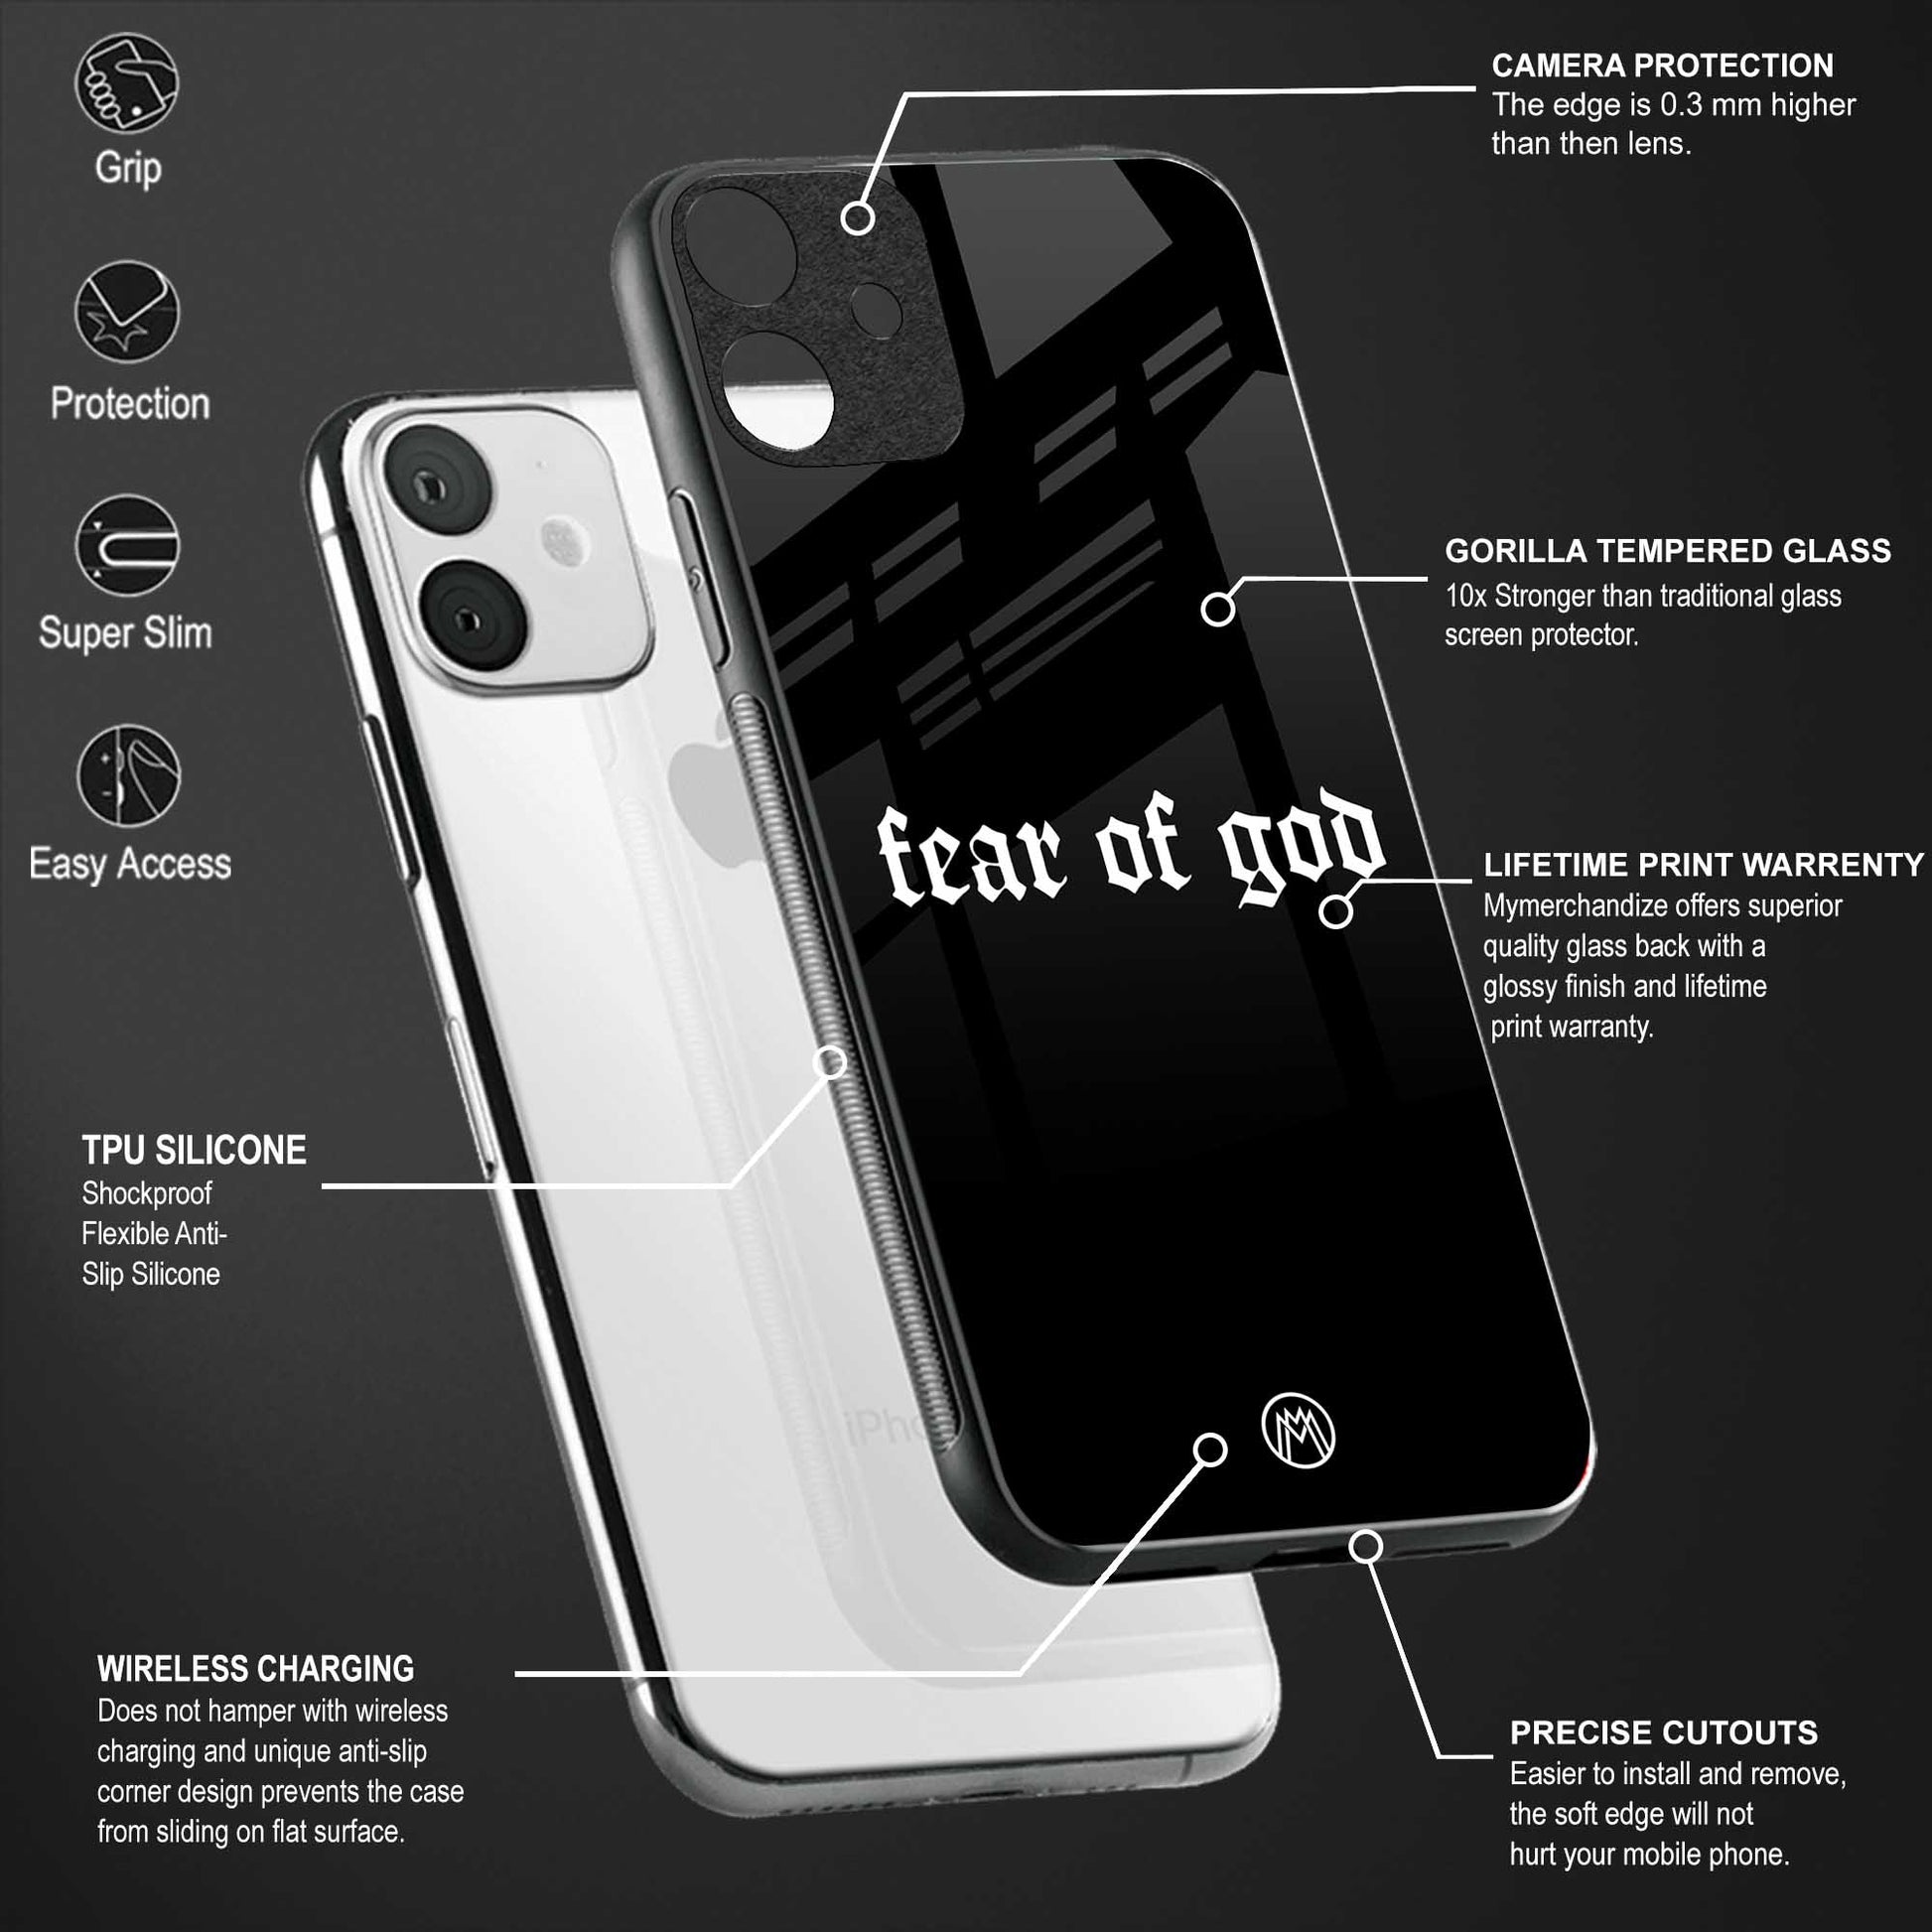 fear of god phone cover for mi 10t 5g